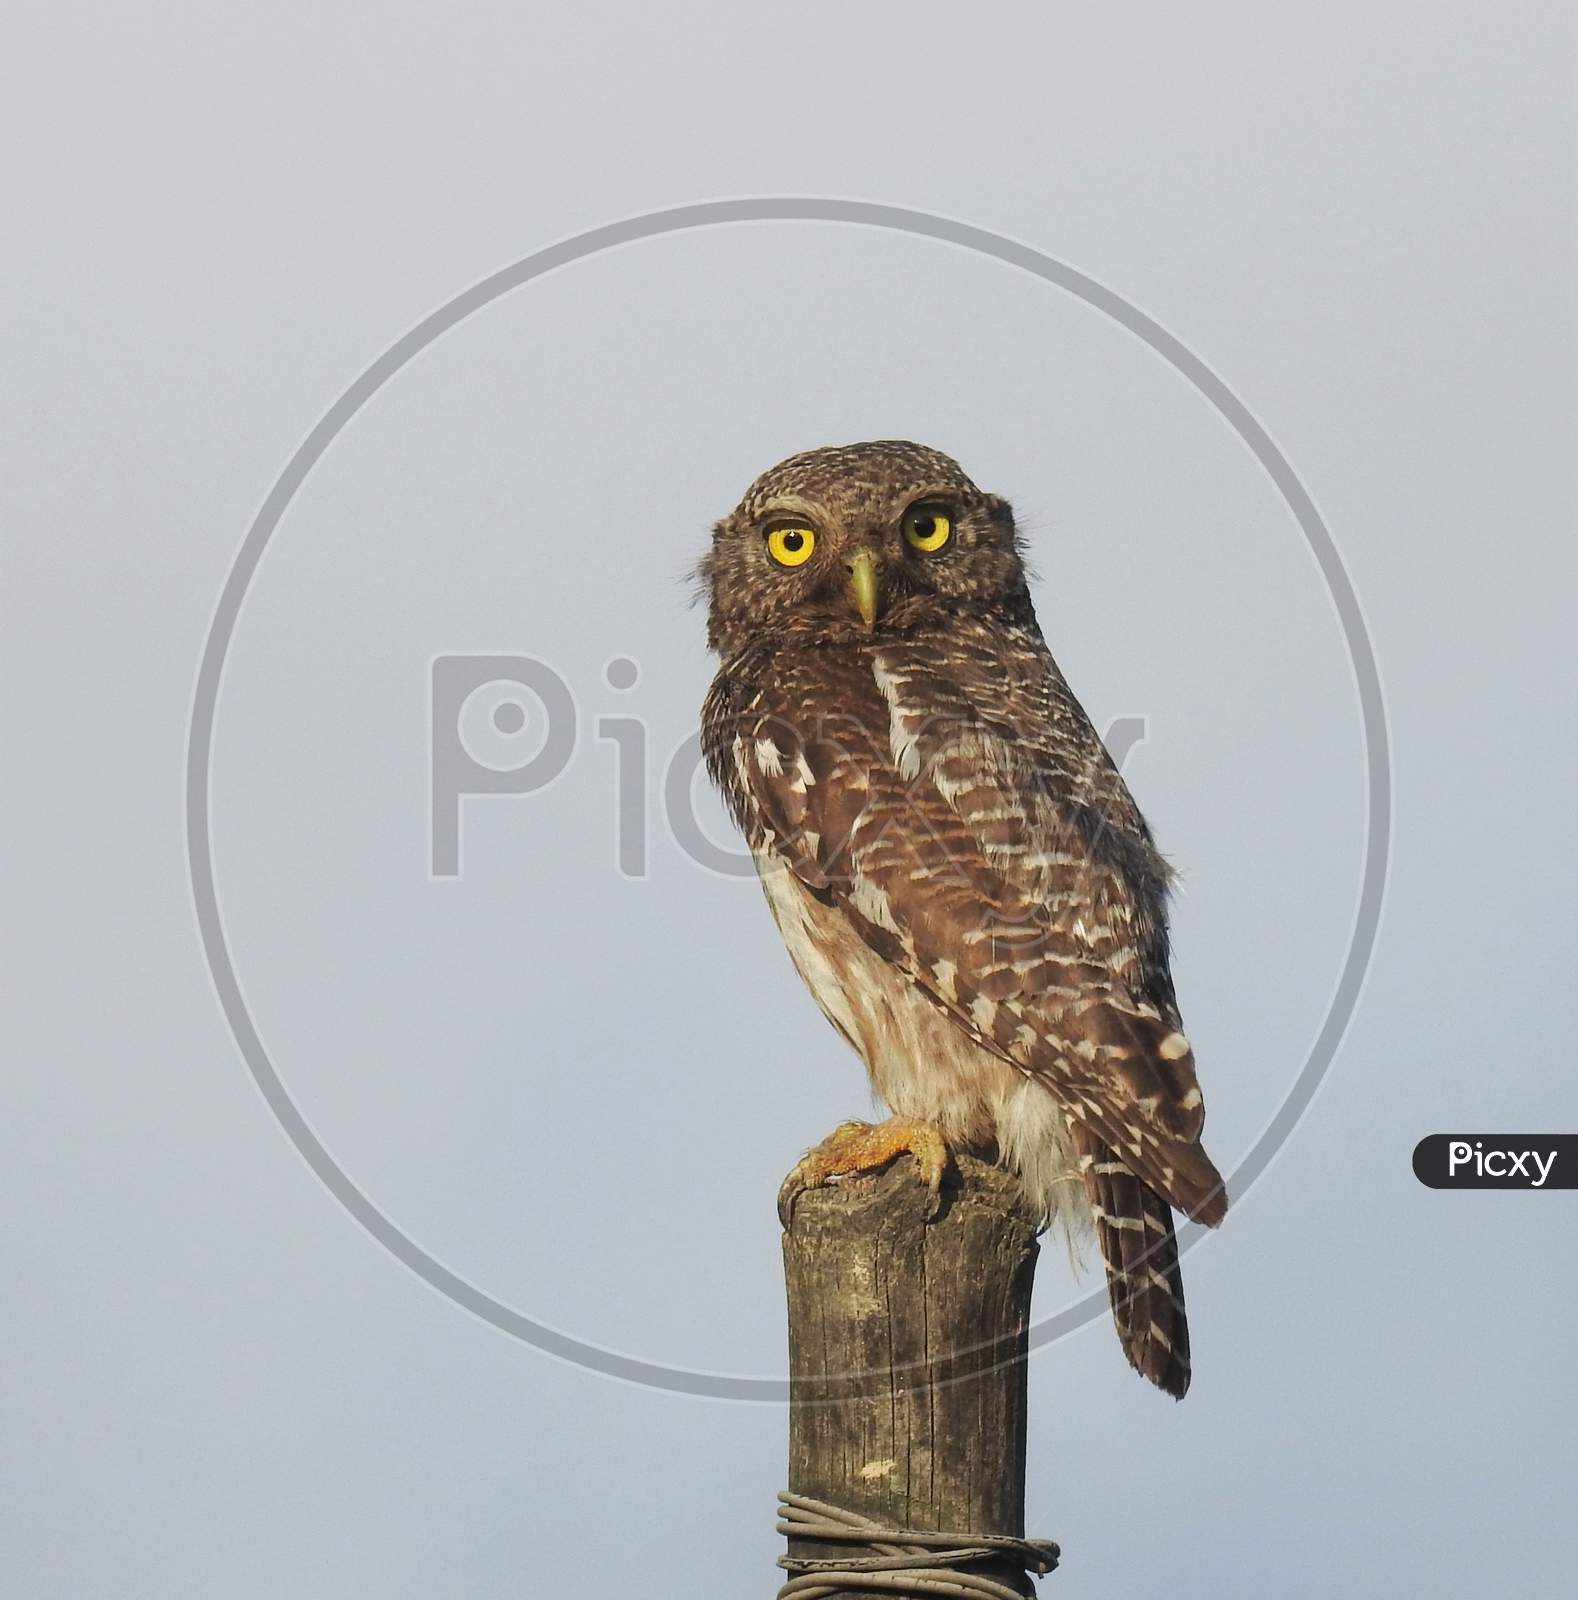 Owl (asian barred owlet) sitting on wooden pole during day with clear background